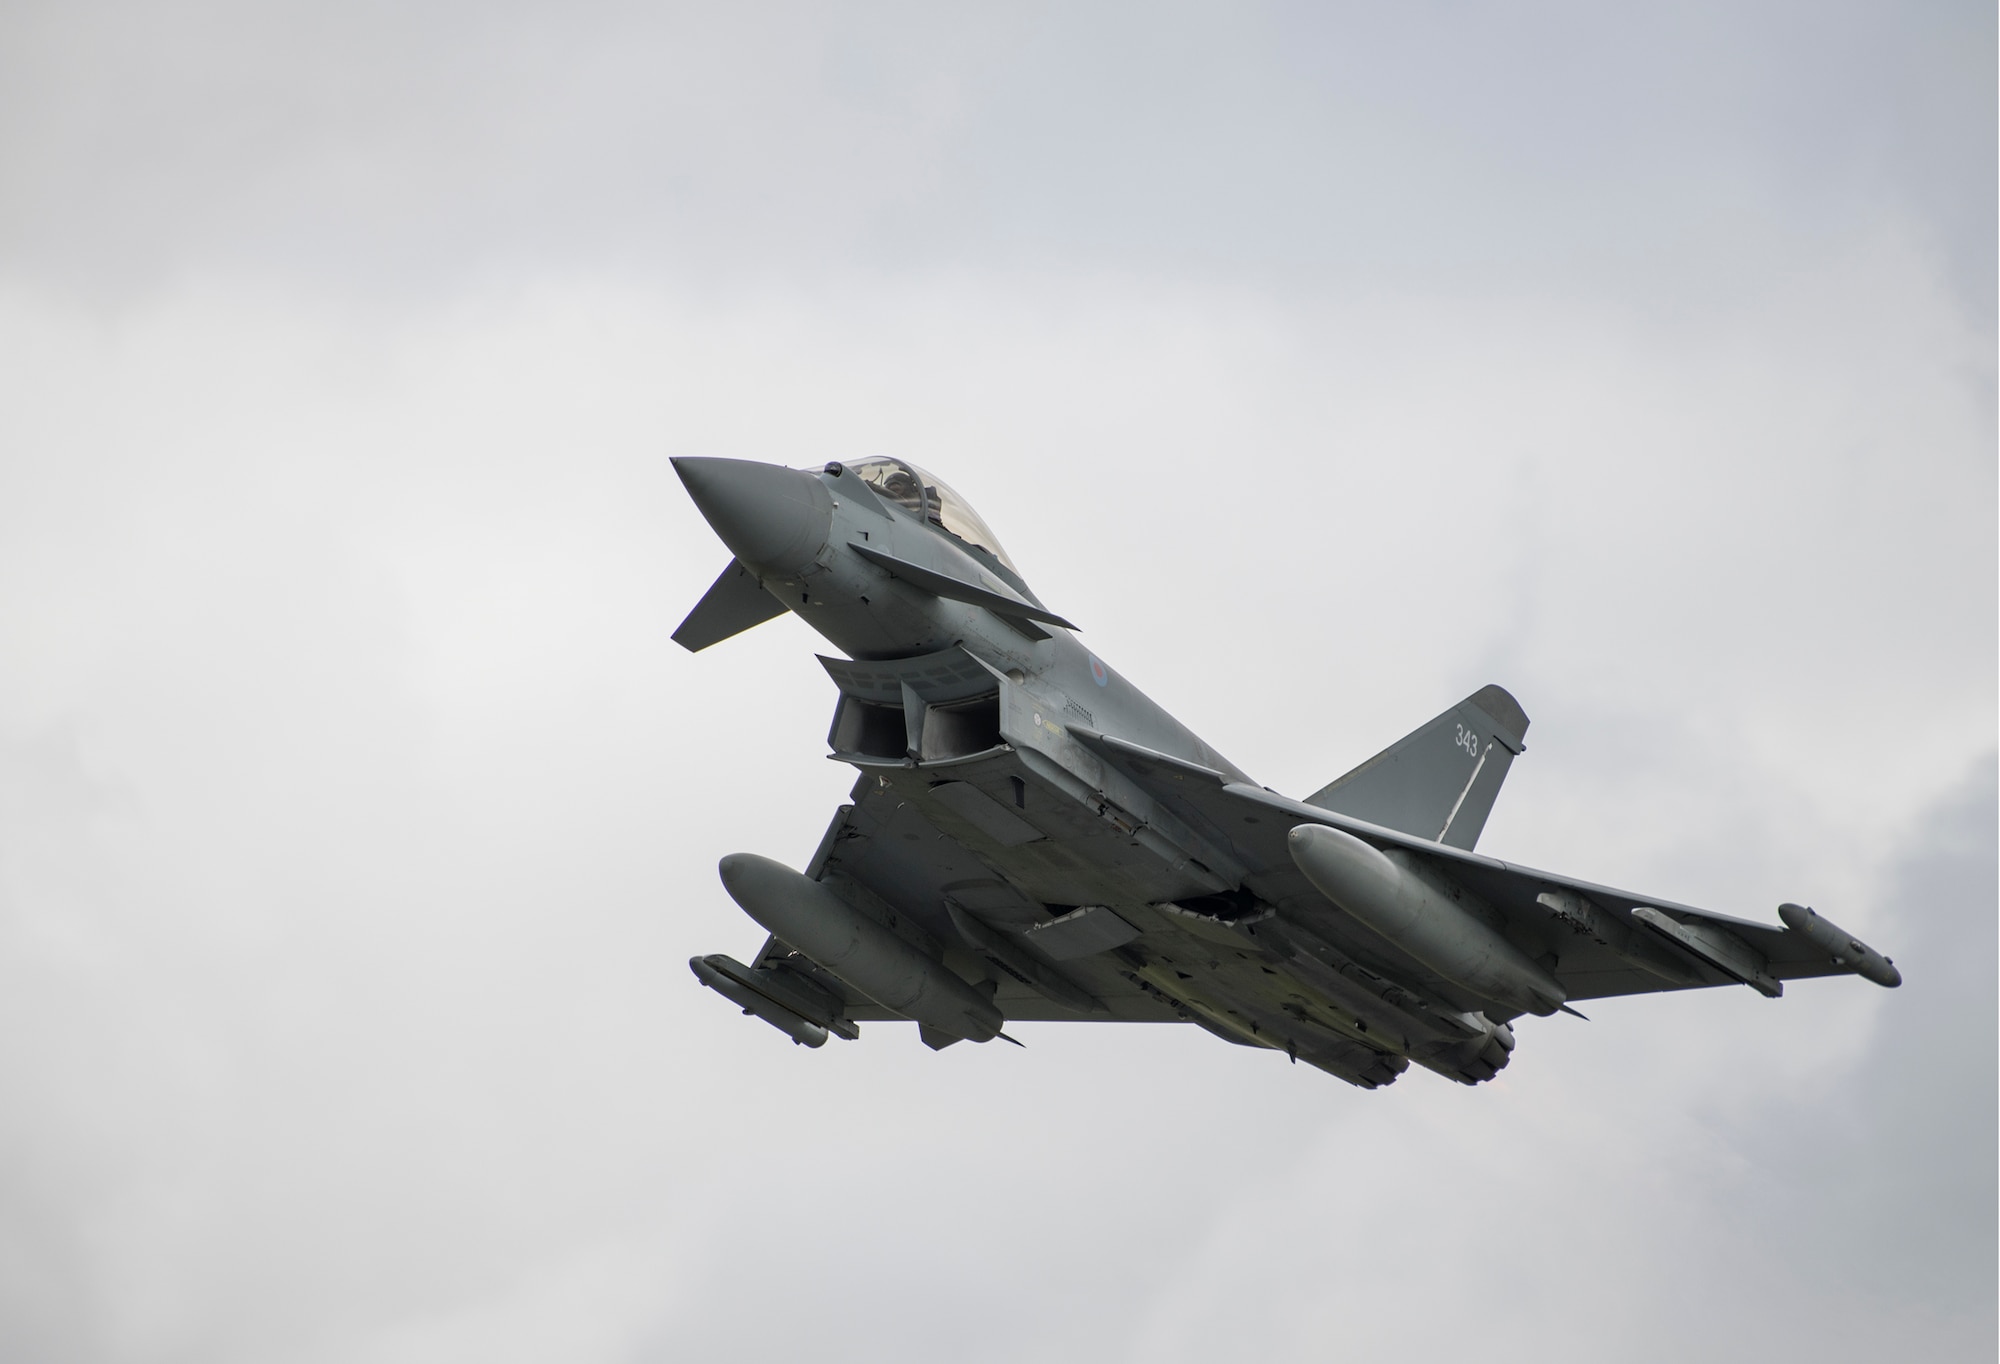 A Royal Air Force Eurofighter Typhoon FGR4 flies past the audience during the NATO 70th Anniversary Flypast at the 2019 Royal International Air Tattoo at RAF Fairford, England, July 20, 2019. This year, RIAT commemorated the 70th anniversary of NATO and highlighted the United States' enduring commitment to its European allies. (U.S. Air Force photo by Airman 1st Class Jennifer Zima)